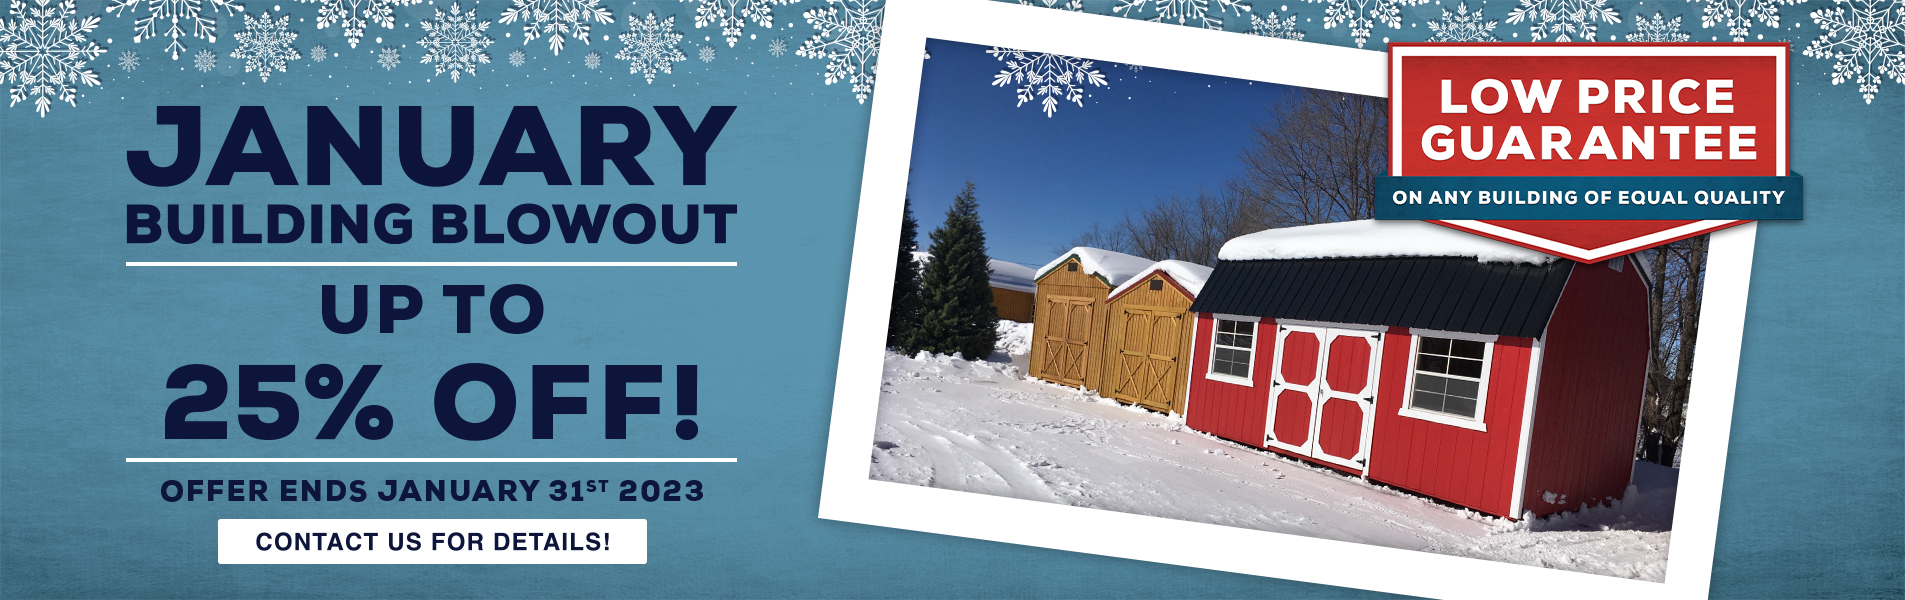 January Building Blowout Sales Event for shed sales at French Creek Shed Sales in Casper, WY Sheds up to 25% off! Old Hickory Low Price Guarantee on any building of equal quality.